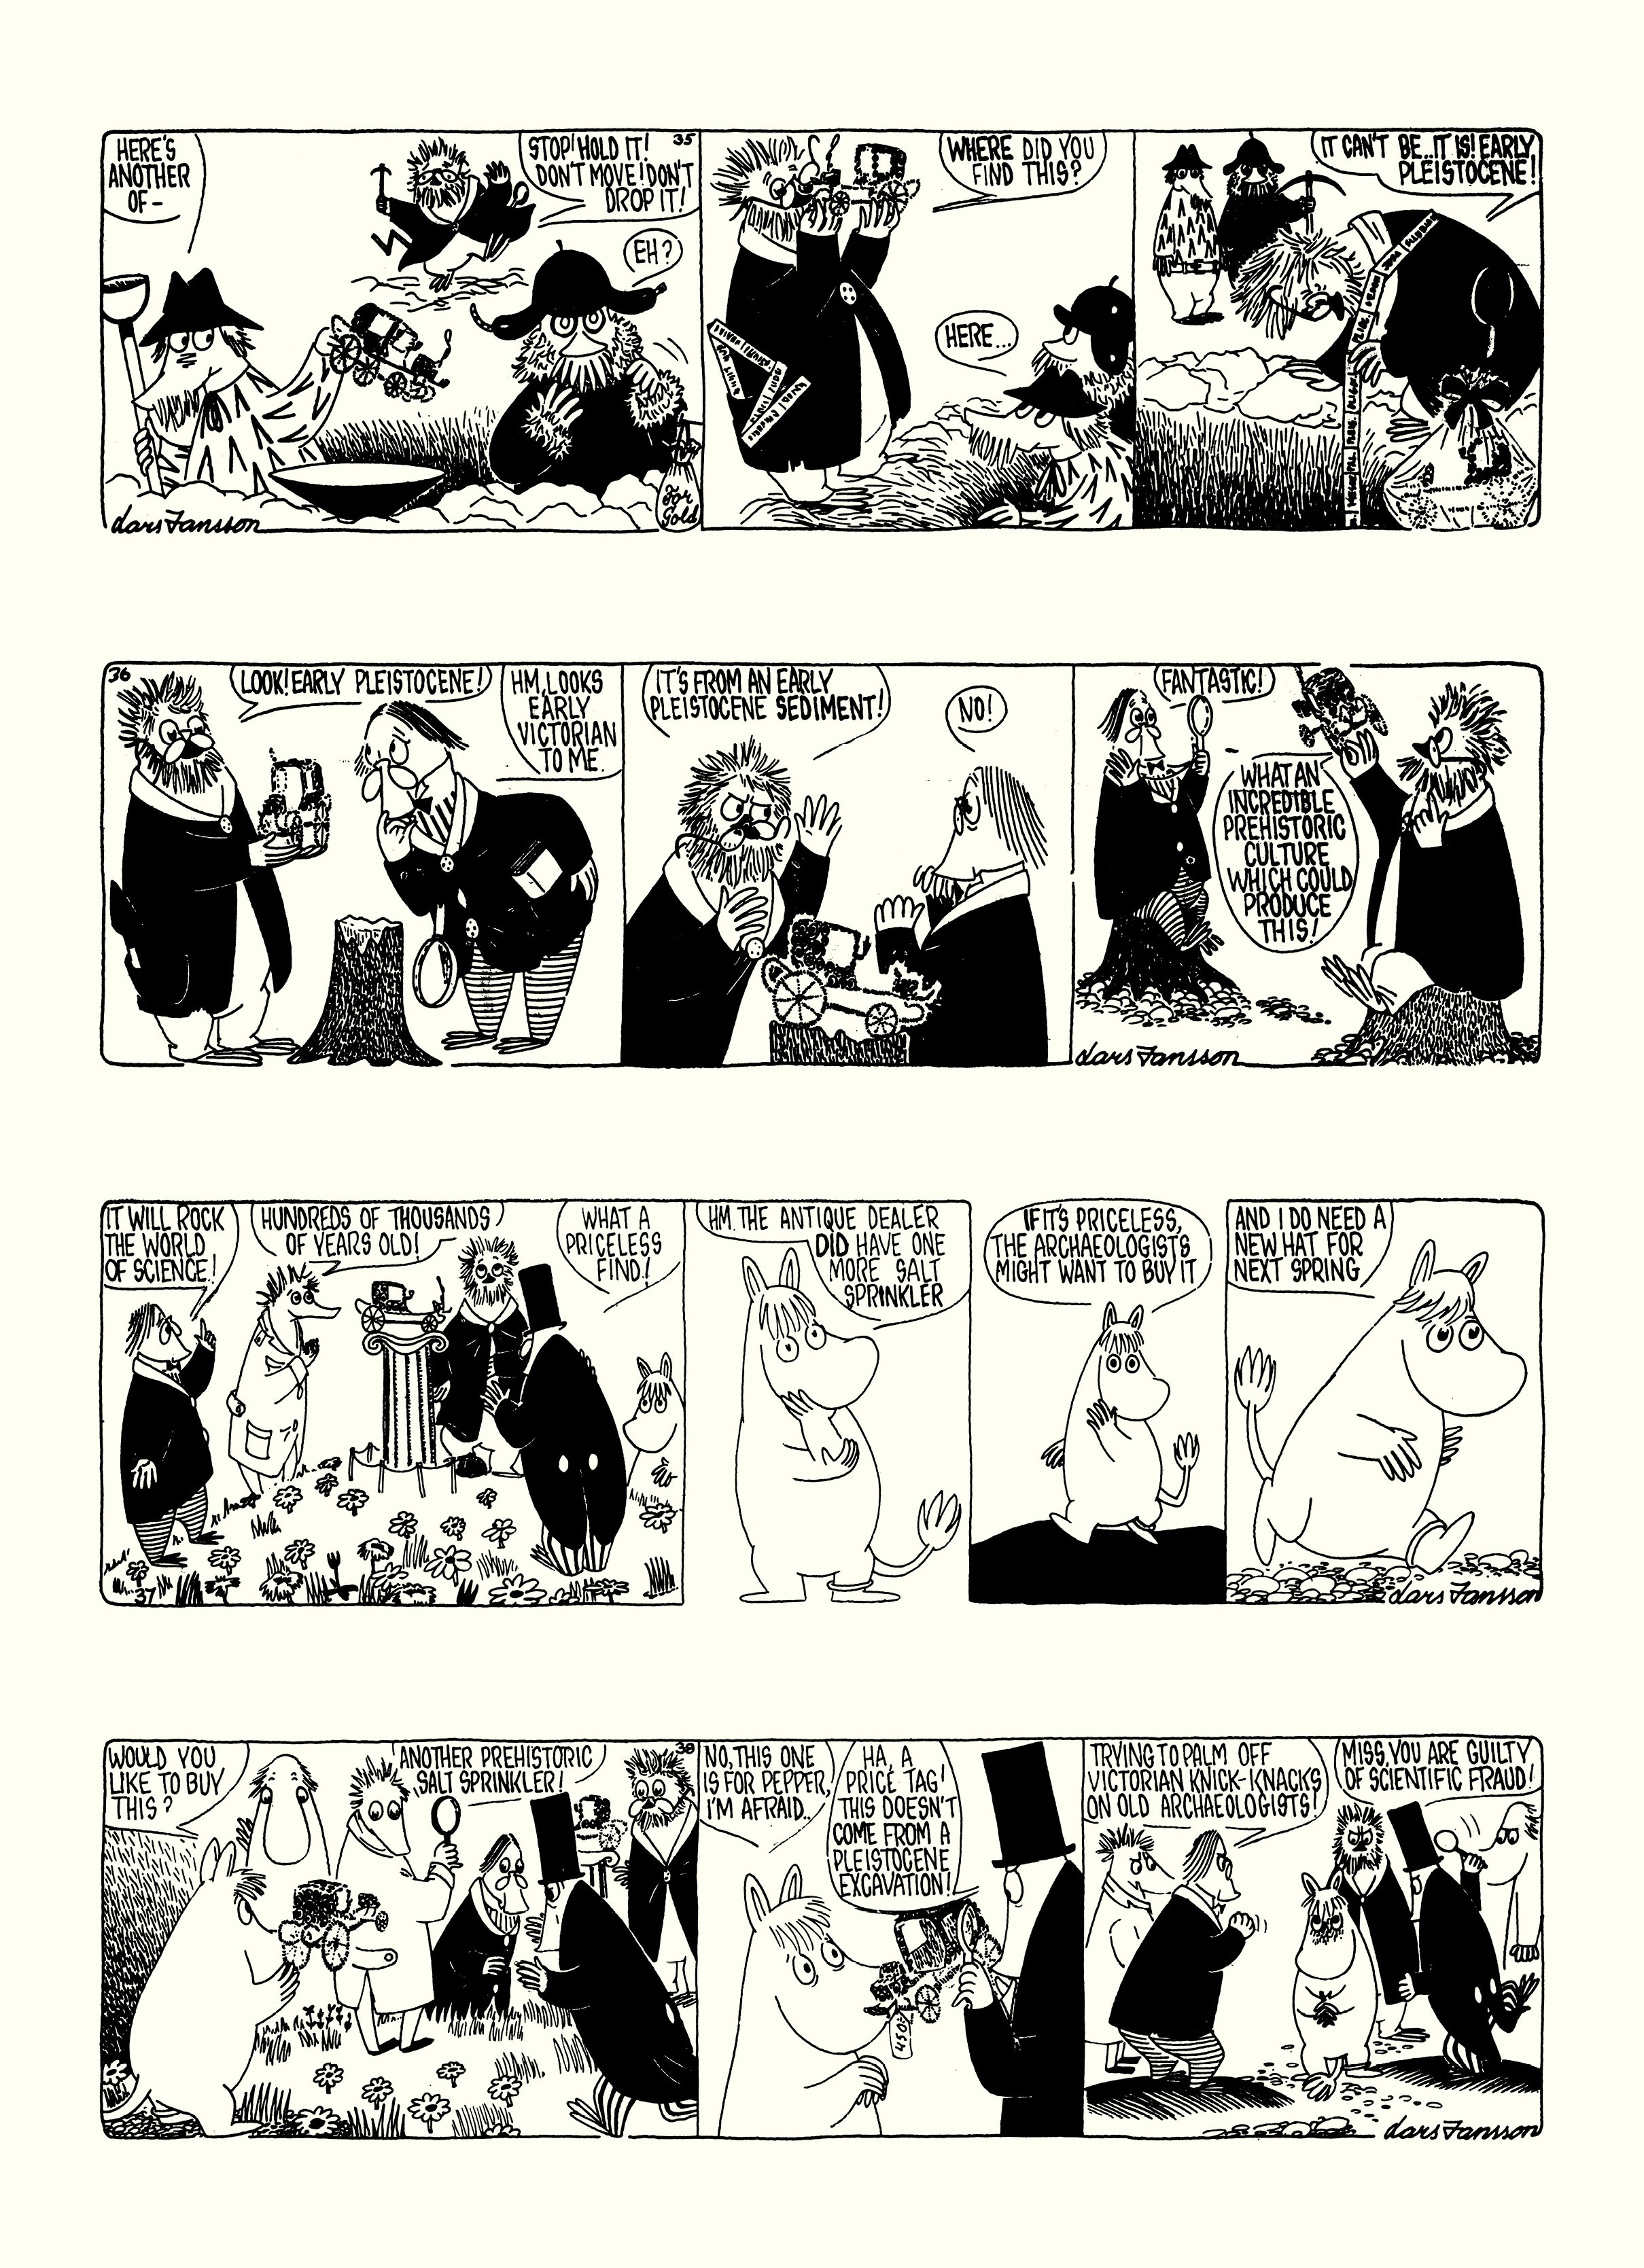 Read online Moomin: The Complete Lars Jansson Comic Strip comic -  Issue # TPB 7 - 78